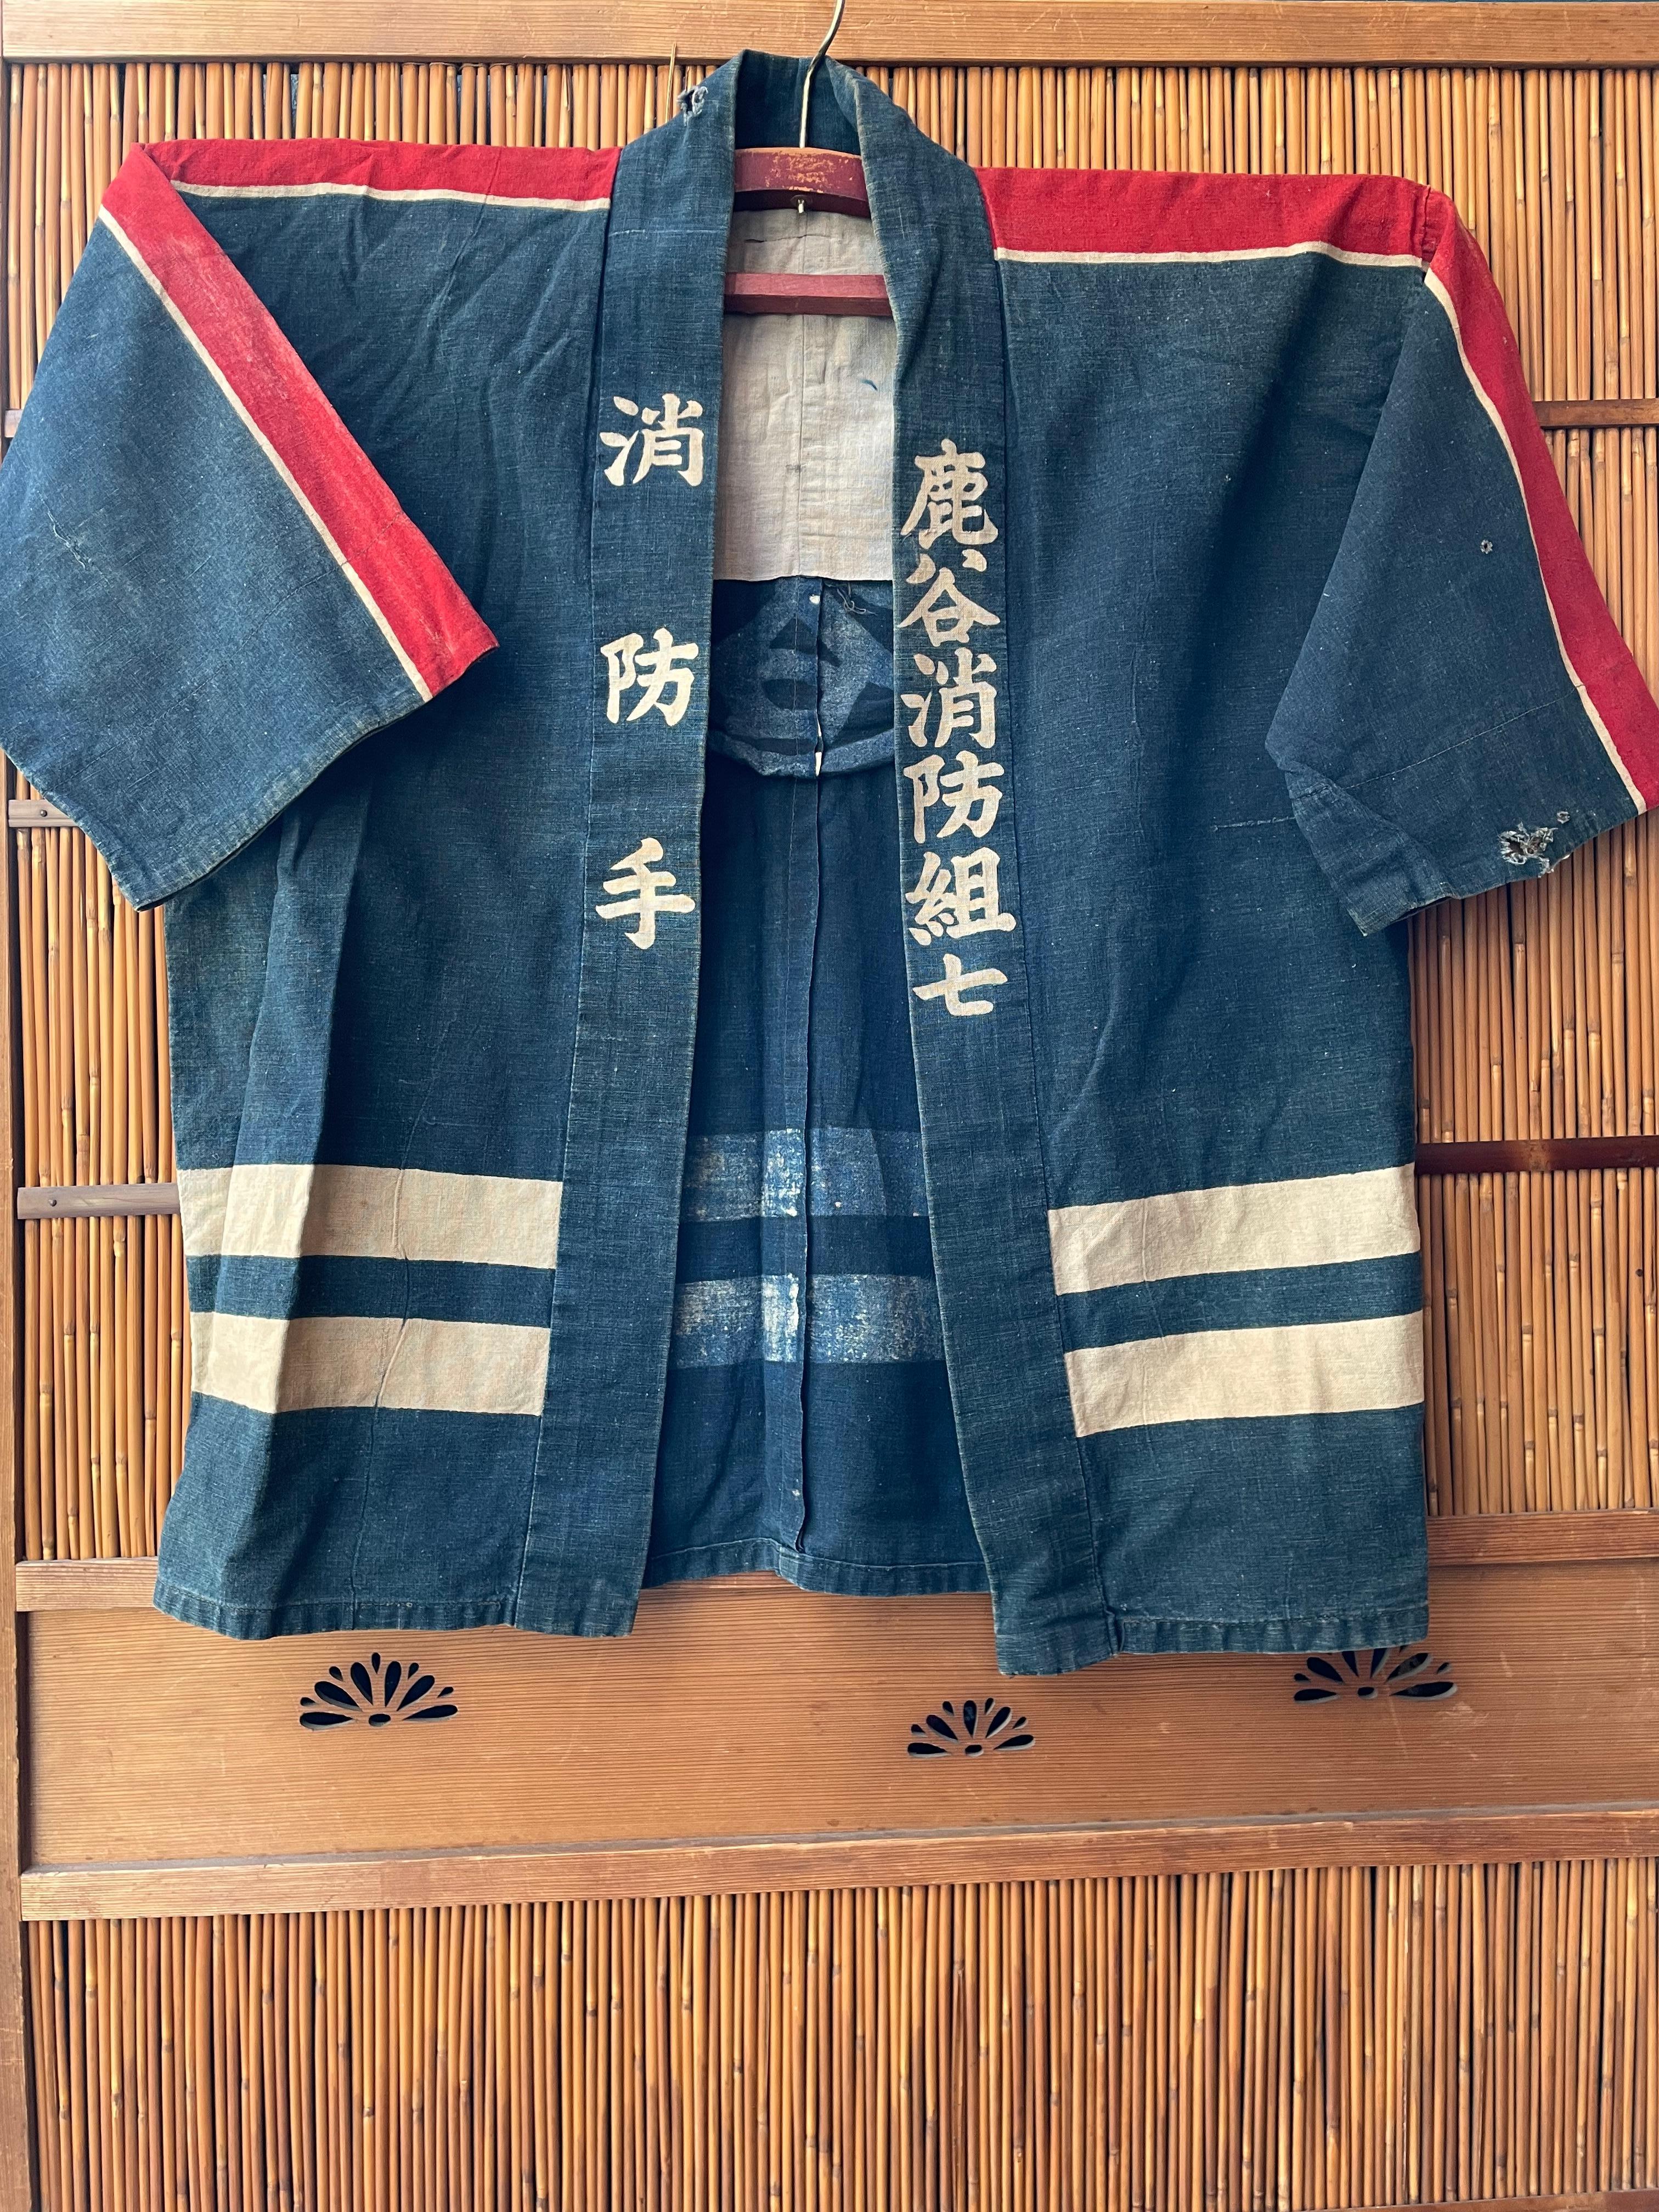 This hanten was made around 1920-1926 in Taisho era in Japan. 
On the front, it is written 'Member of fire brigade Kaya' in Japanese.

Hikeshi banten is a hanten for firefighters, which is made of cotton. It was invented in Edo period which fires